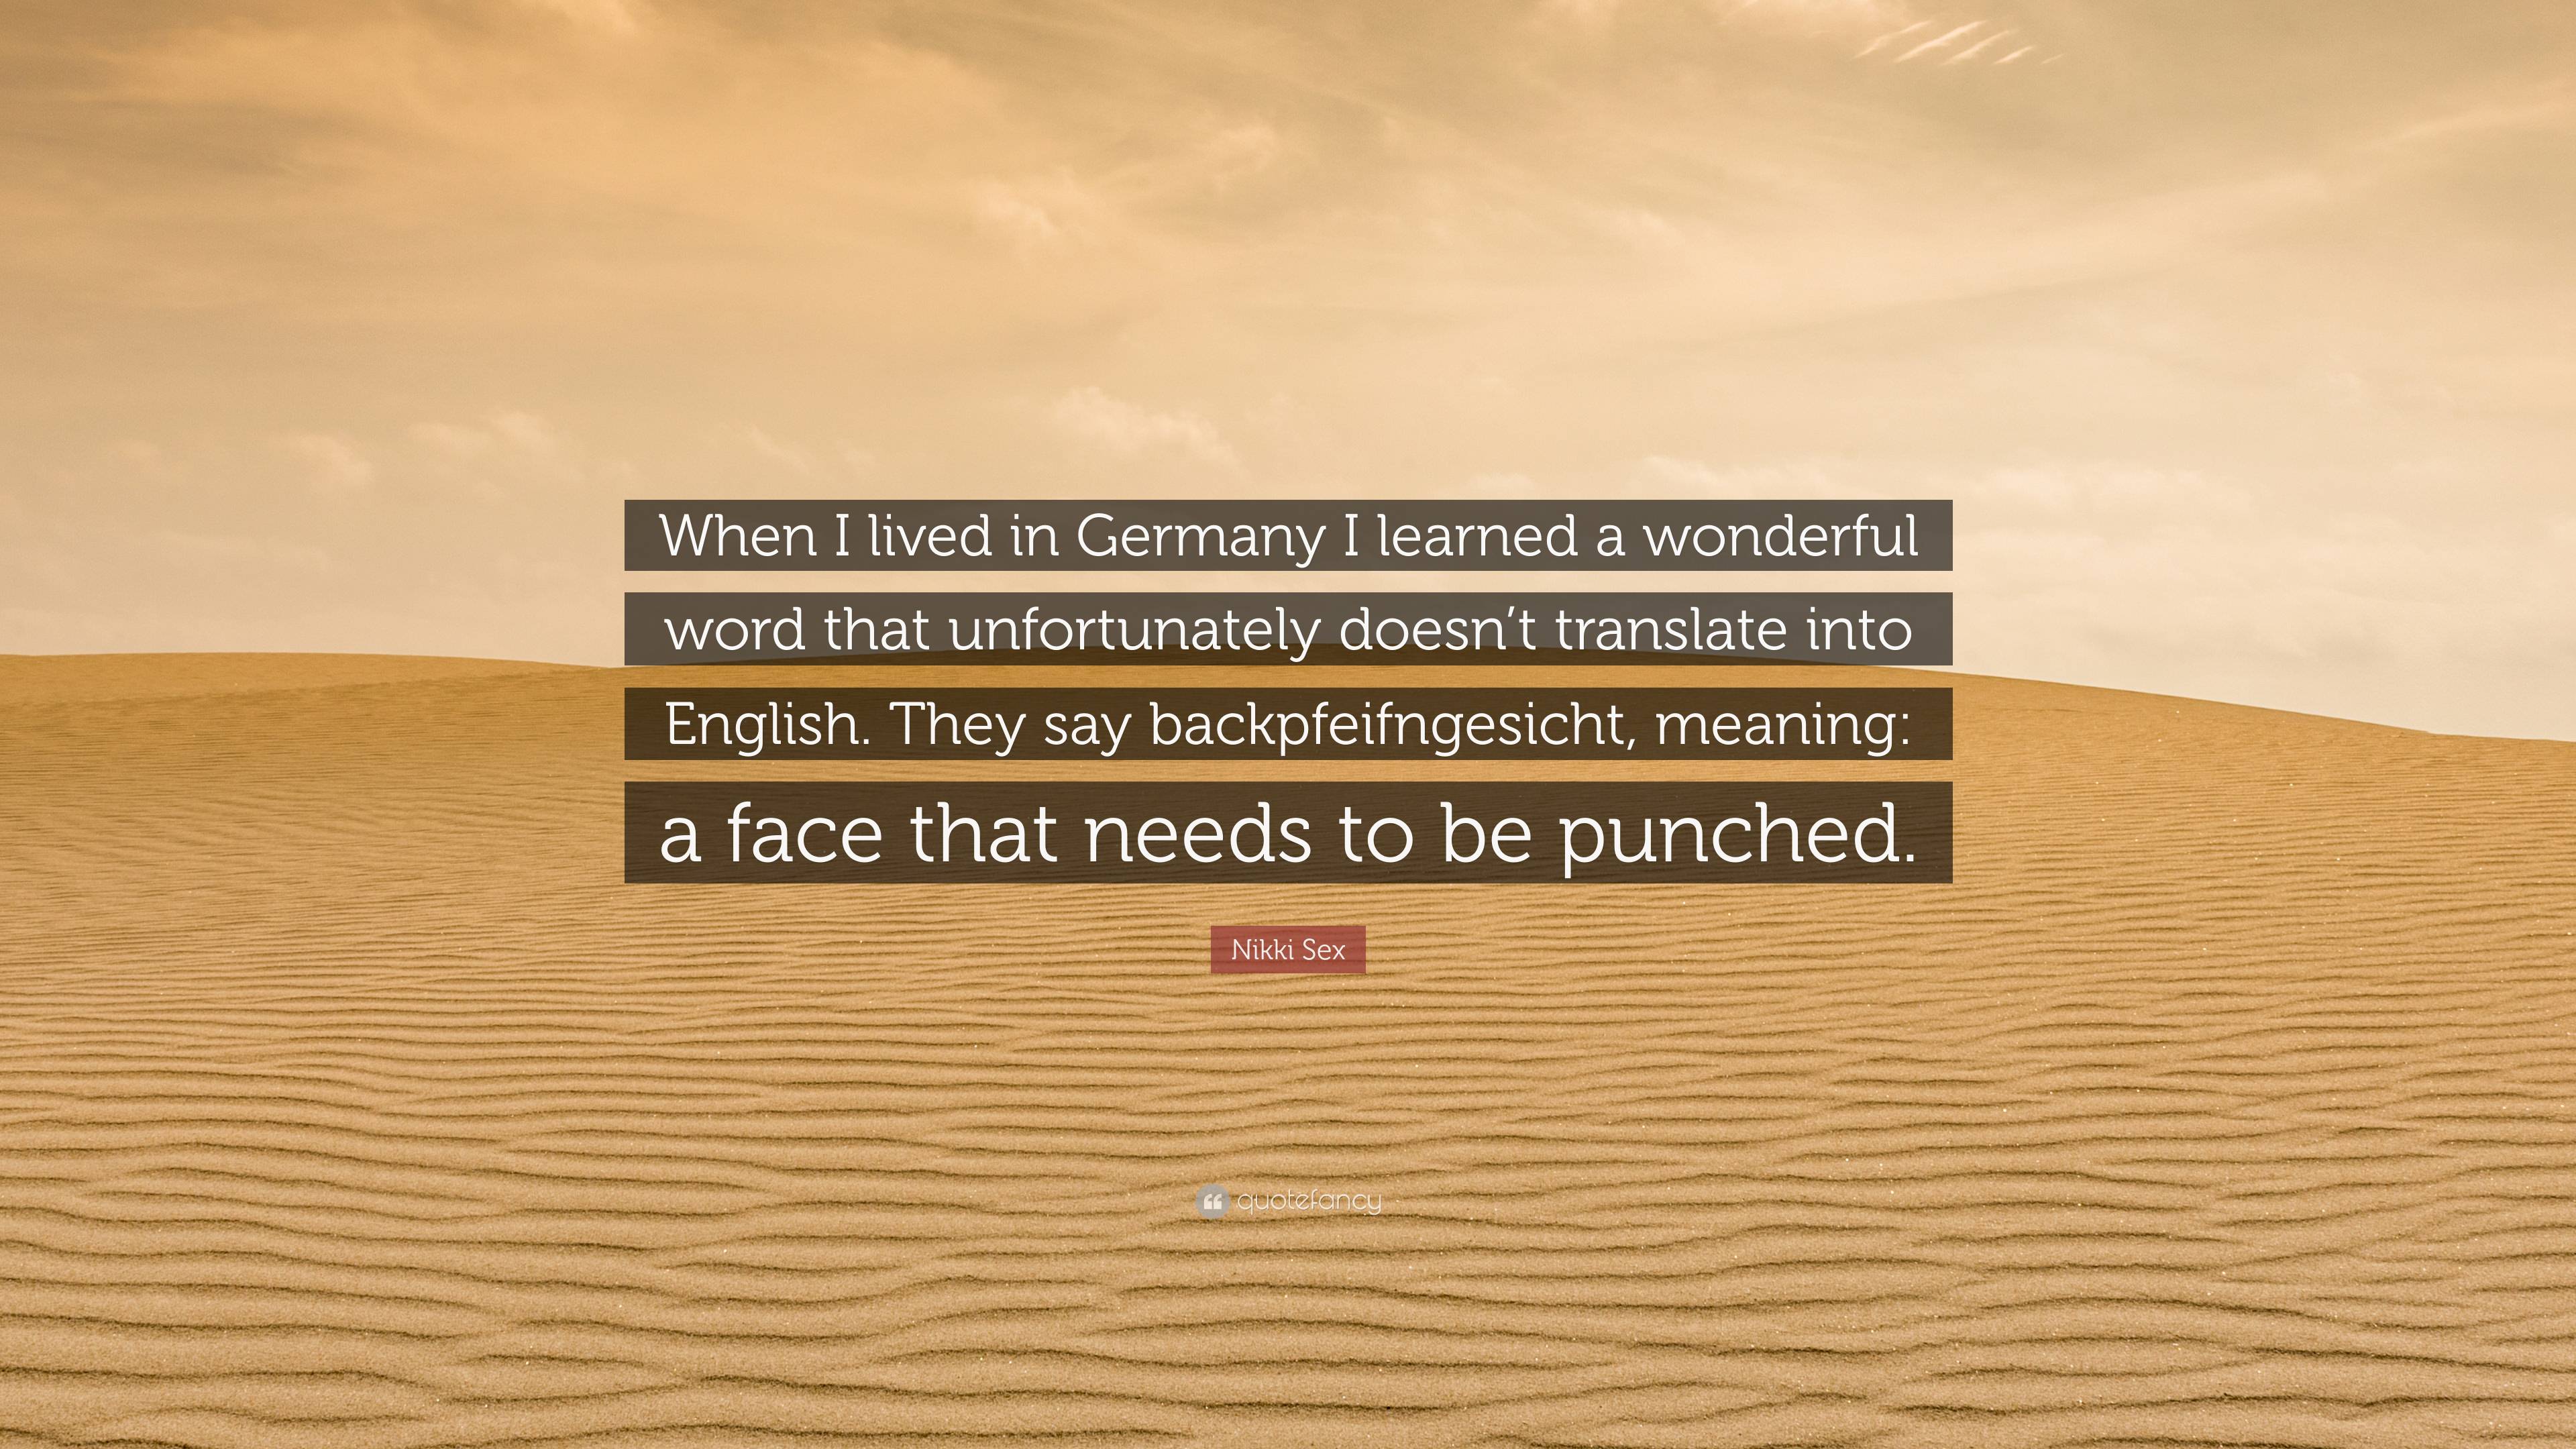 Nikki Sex Quote “When I lived in Germany I learned a wonderful word that unfortunately doesnt translate into English